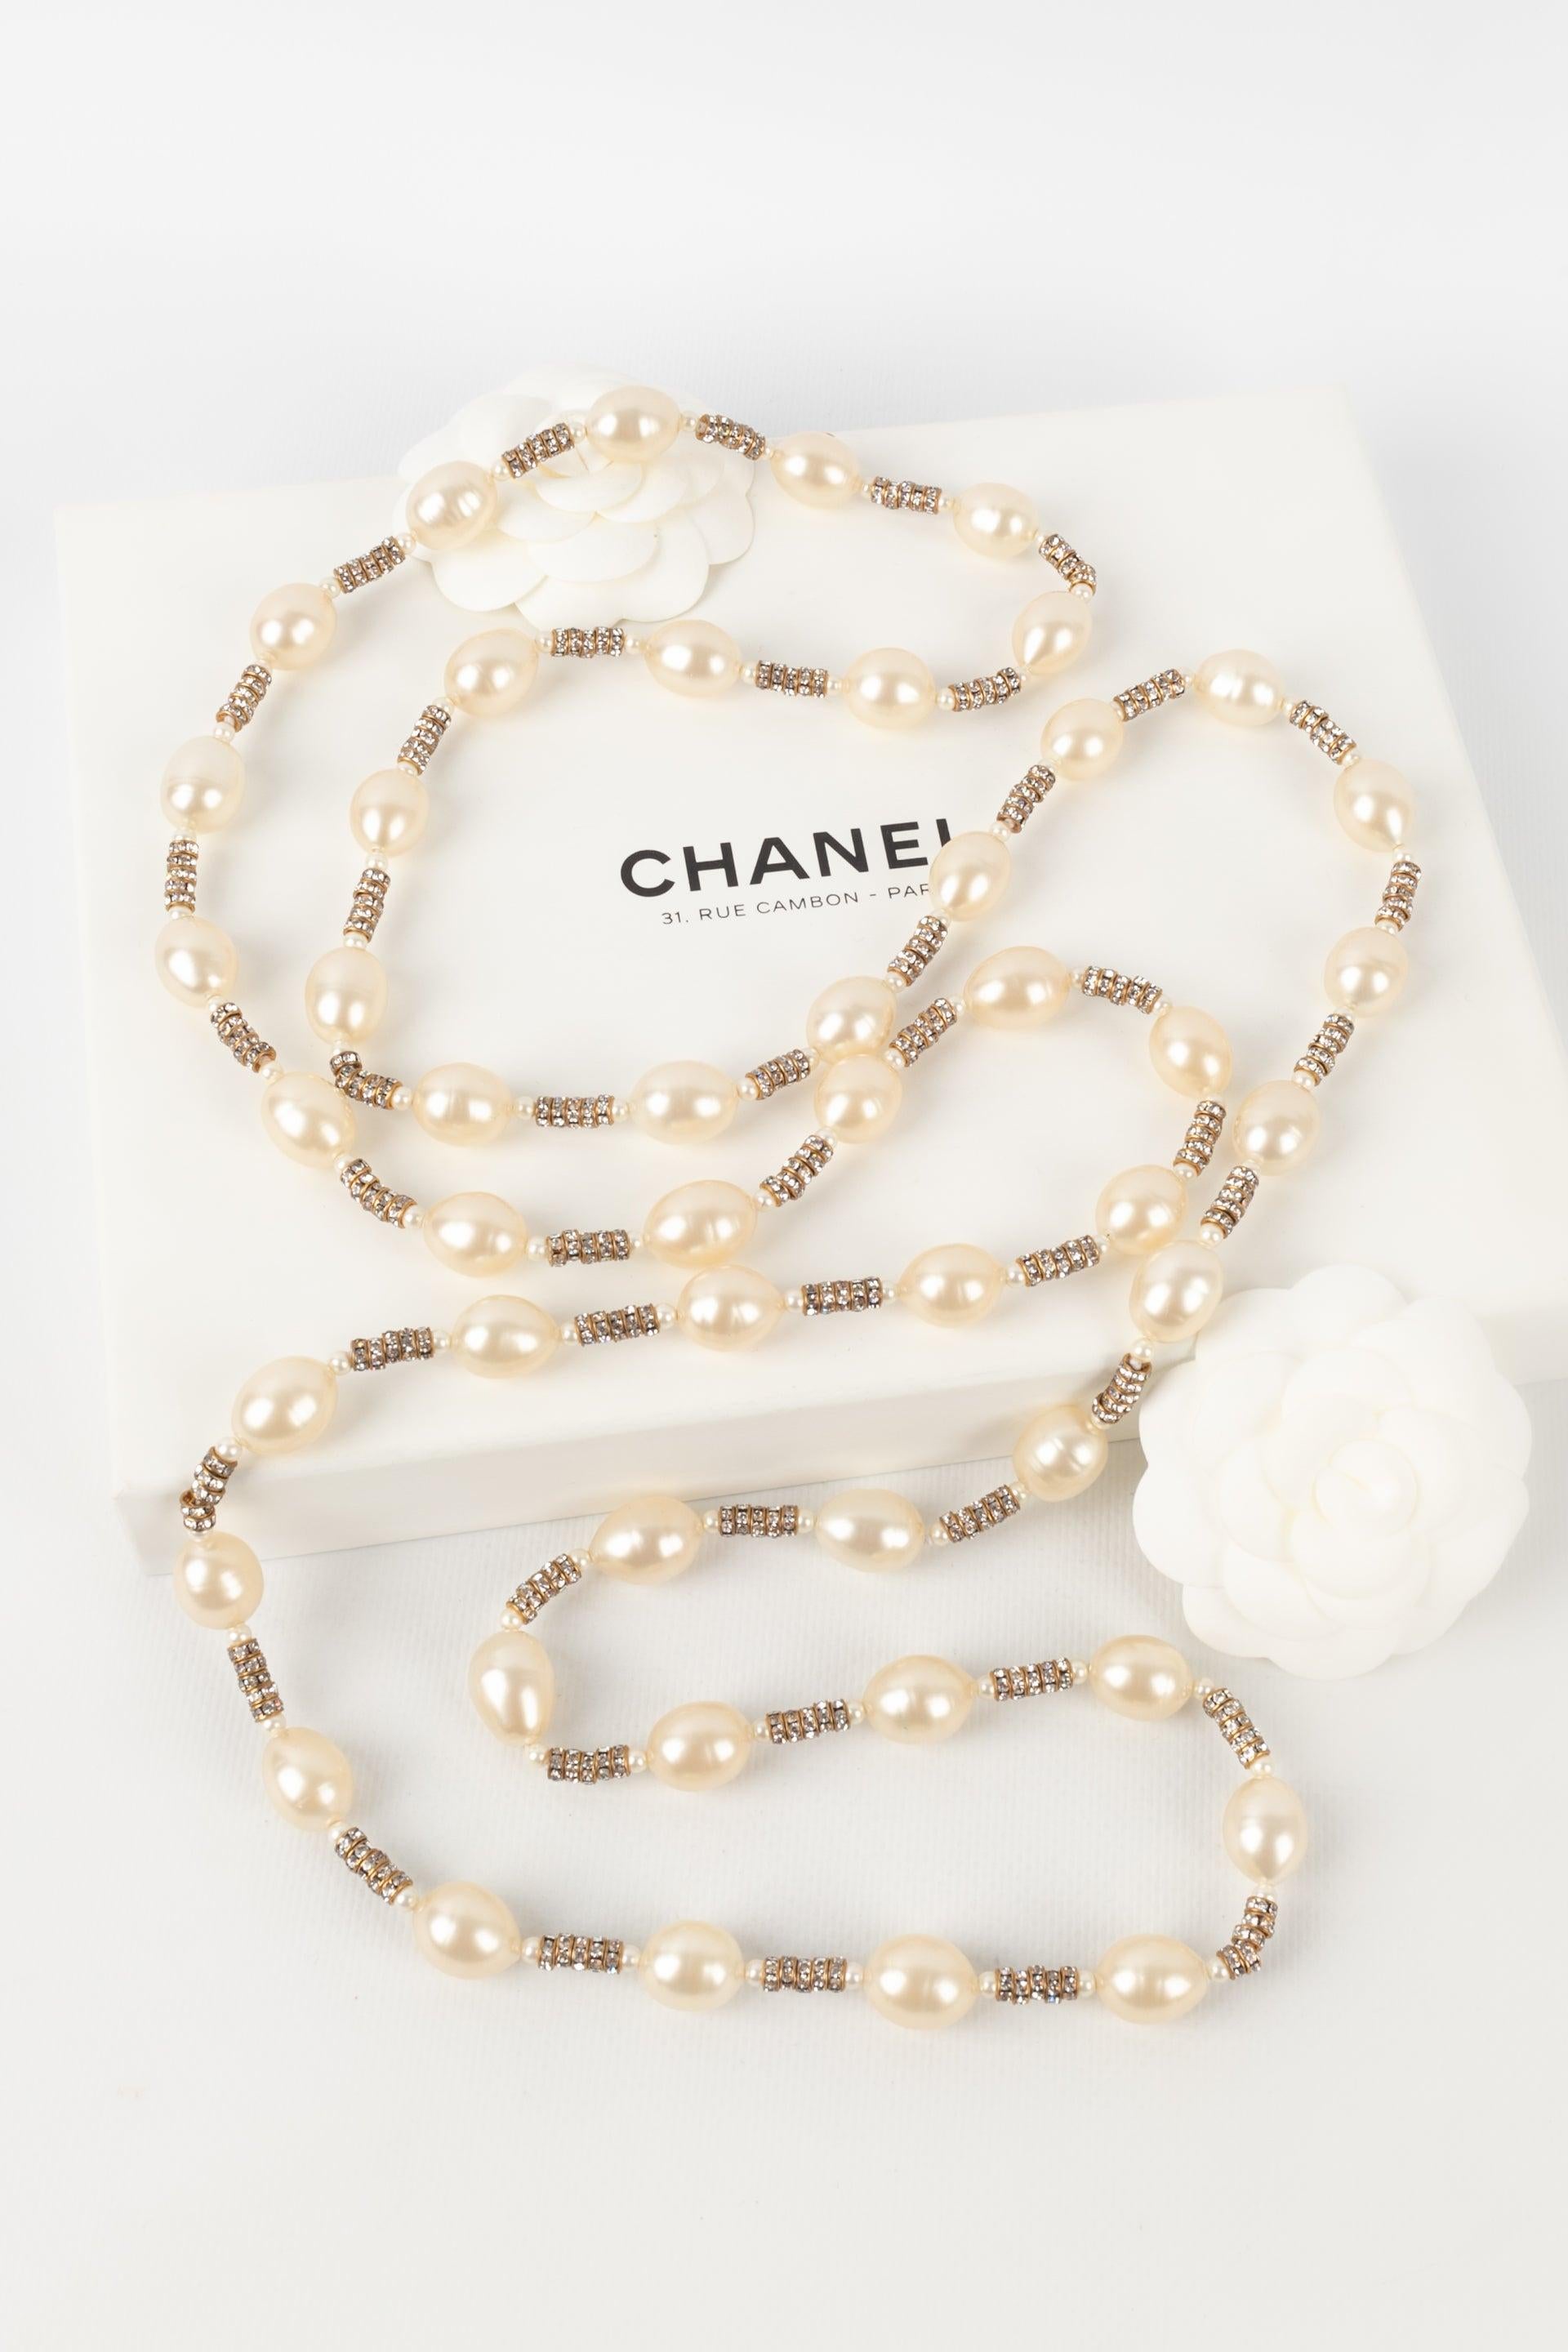 Chanel Costume Pearl Sautoir/ Necklace  with Golden Metal Rhinestone, 1990s For Sale 4